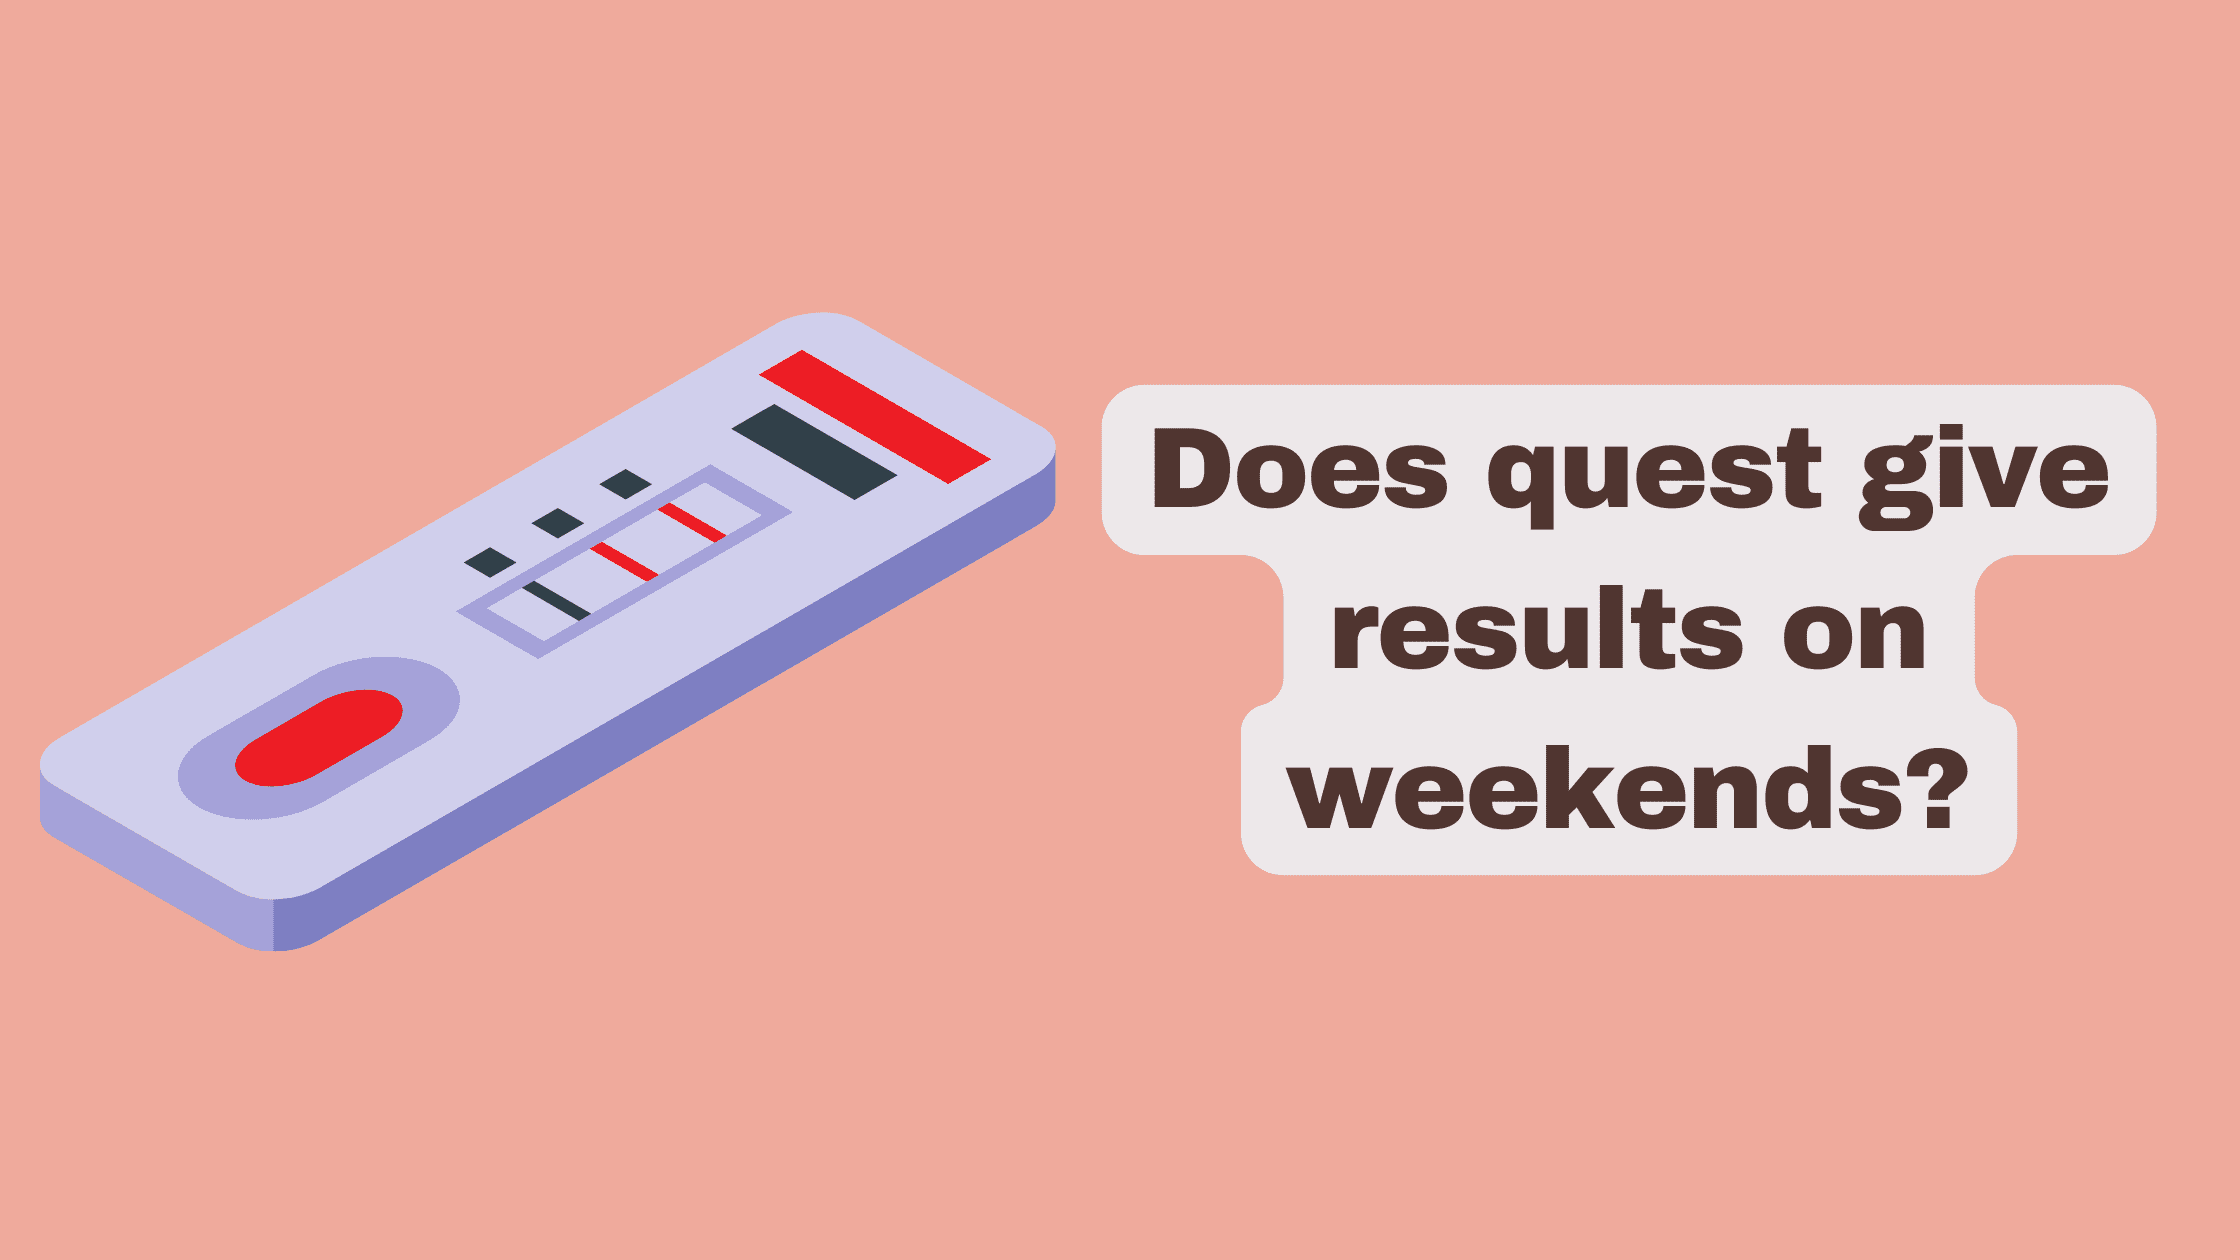 Does quest give results on weekends?